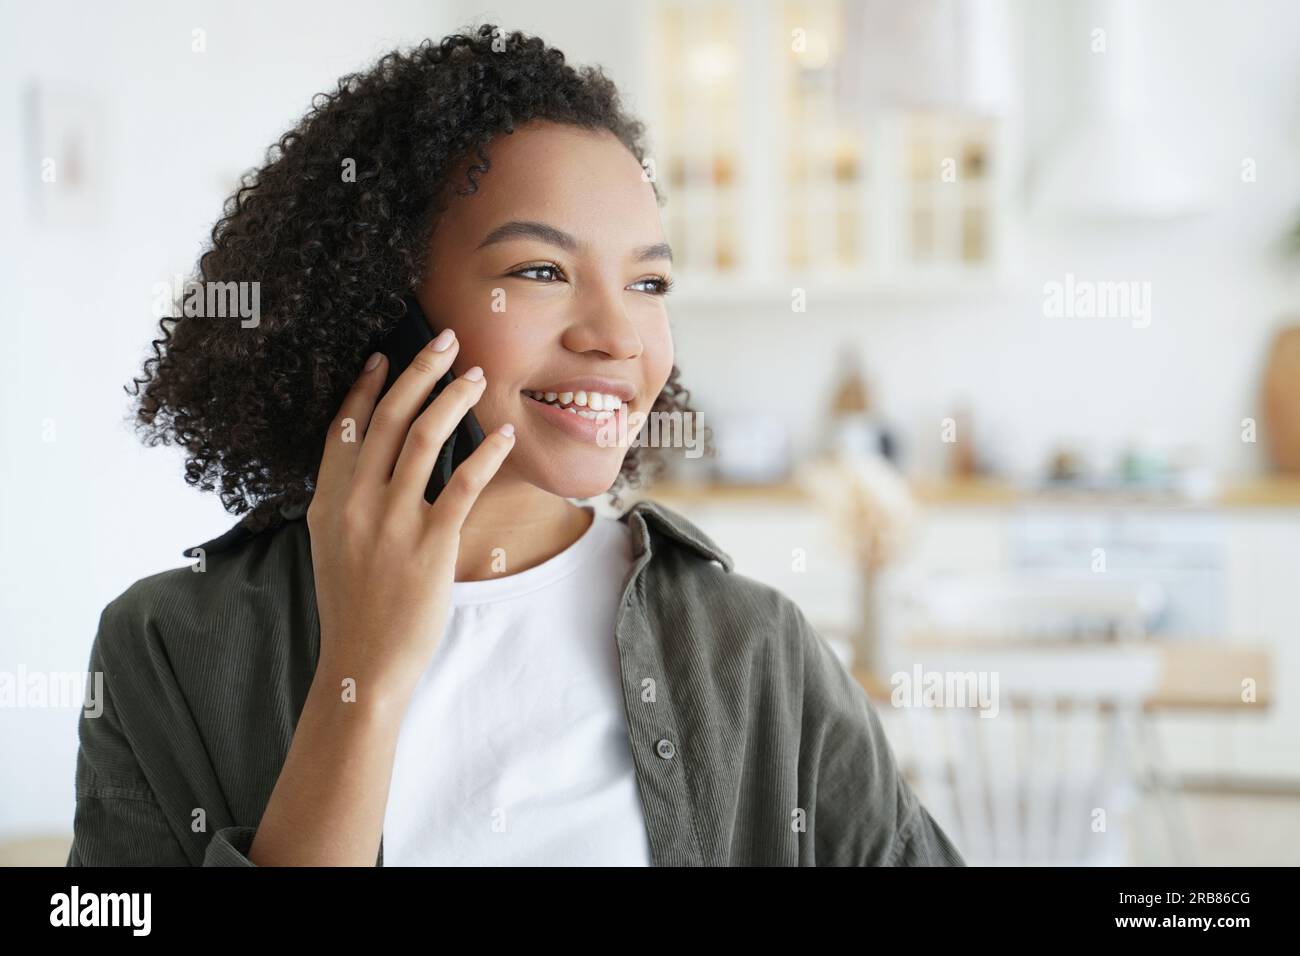 Smiling girl enjoys pleasant phone call at home. Biracial teen gets good news, chats happily on smartphone. Stock Photo